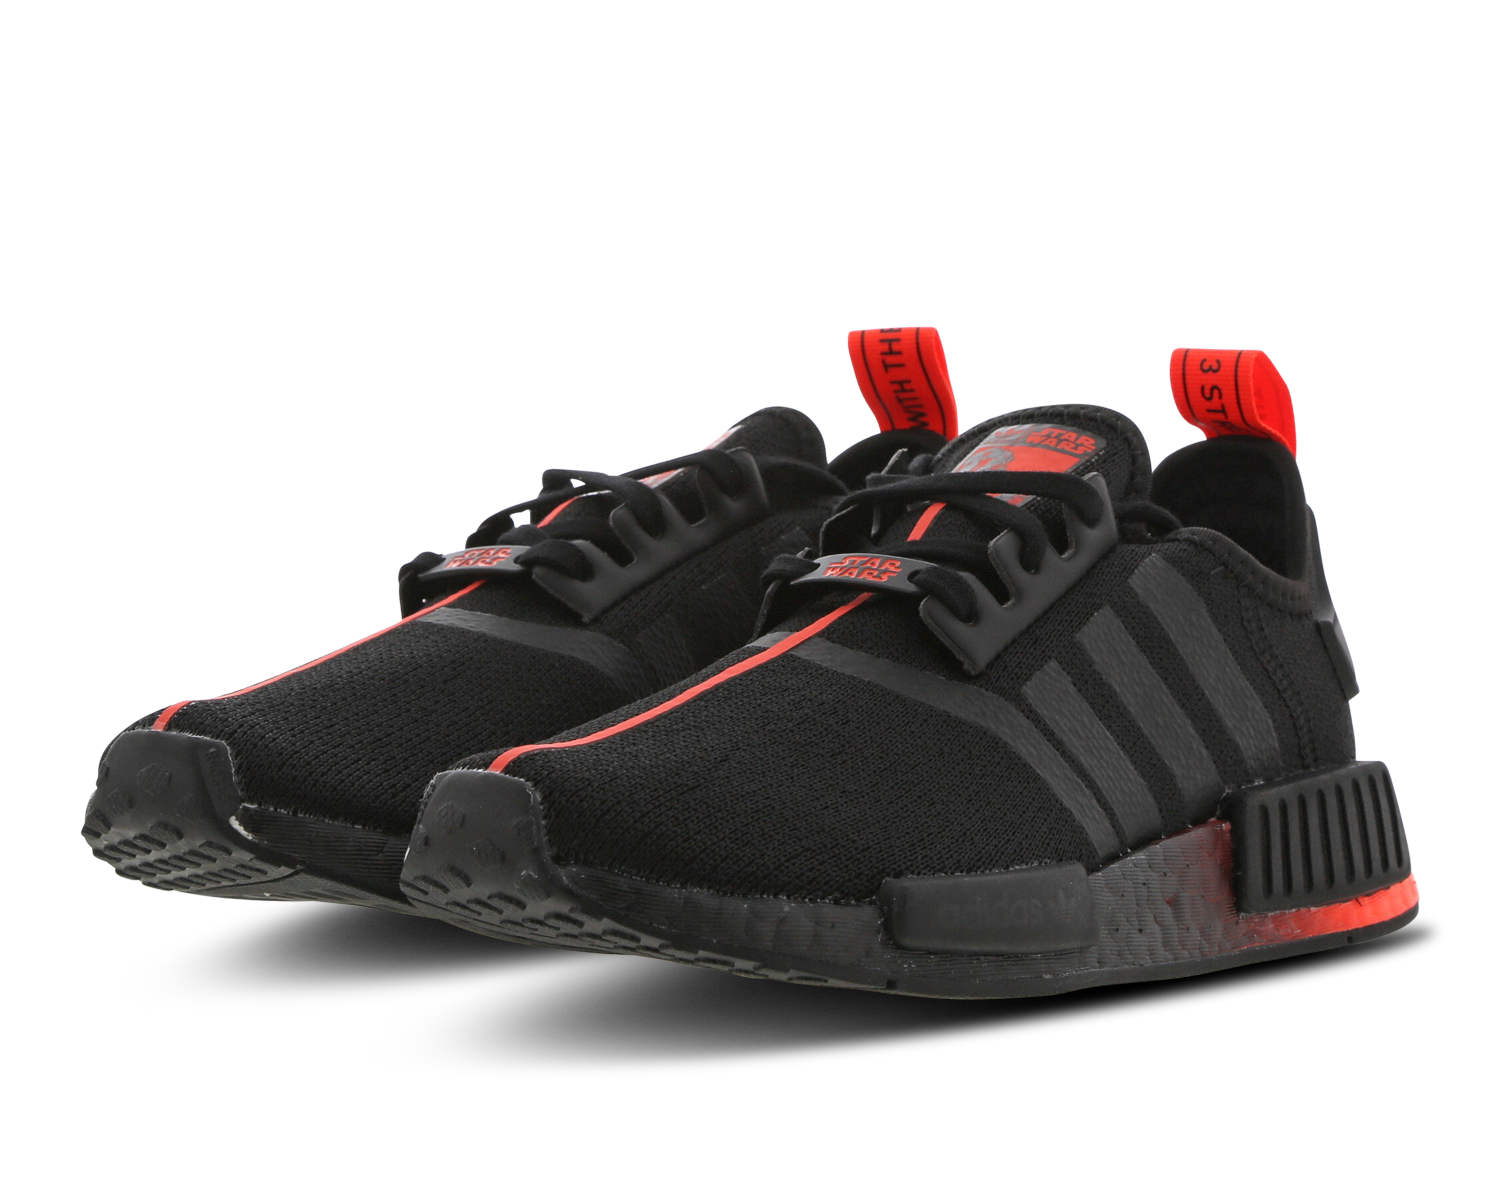 The adidas NMD R1 Primeknit Releasing In Utility Gray Camo